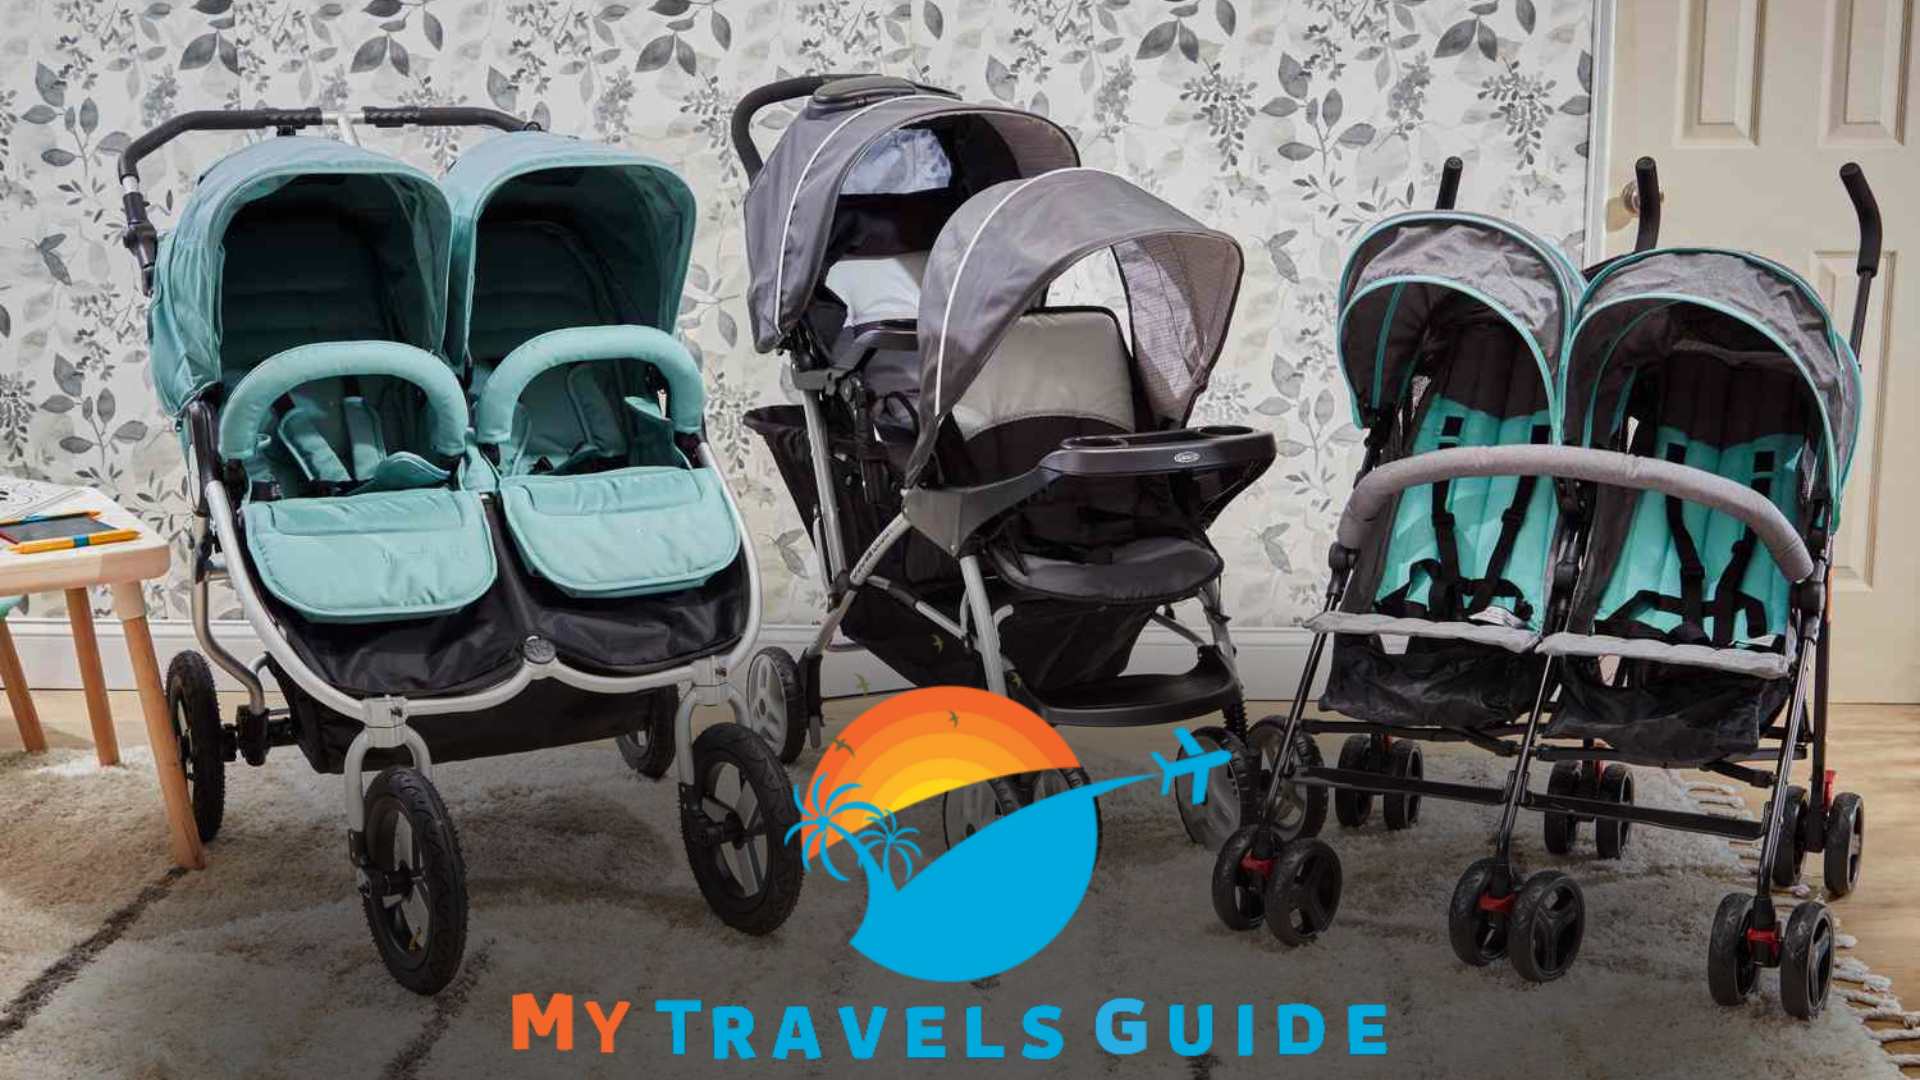 How to Unfold a Graco Stroller A Simple Step-by-Step Guide